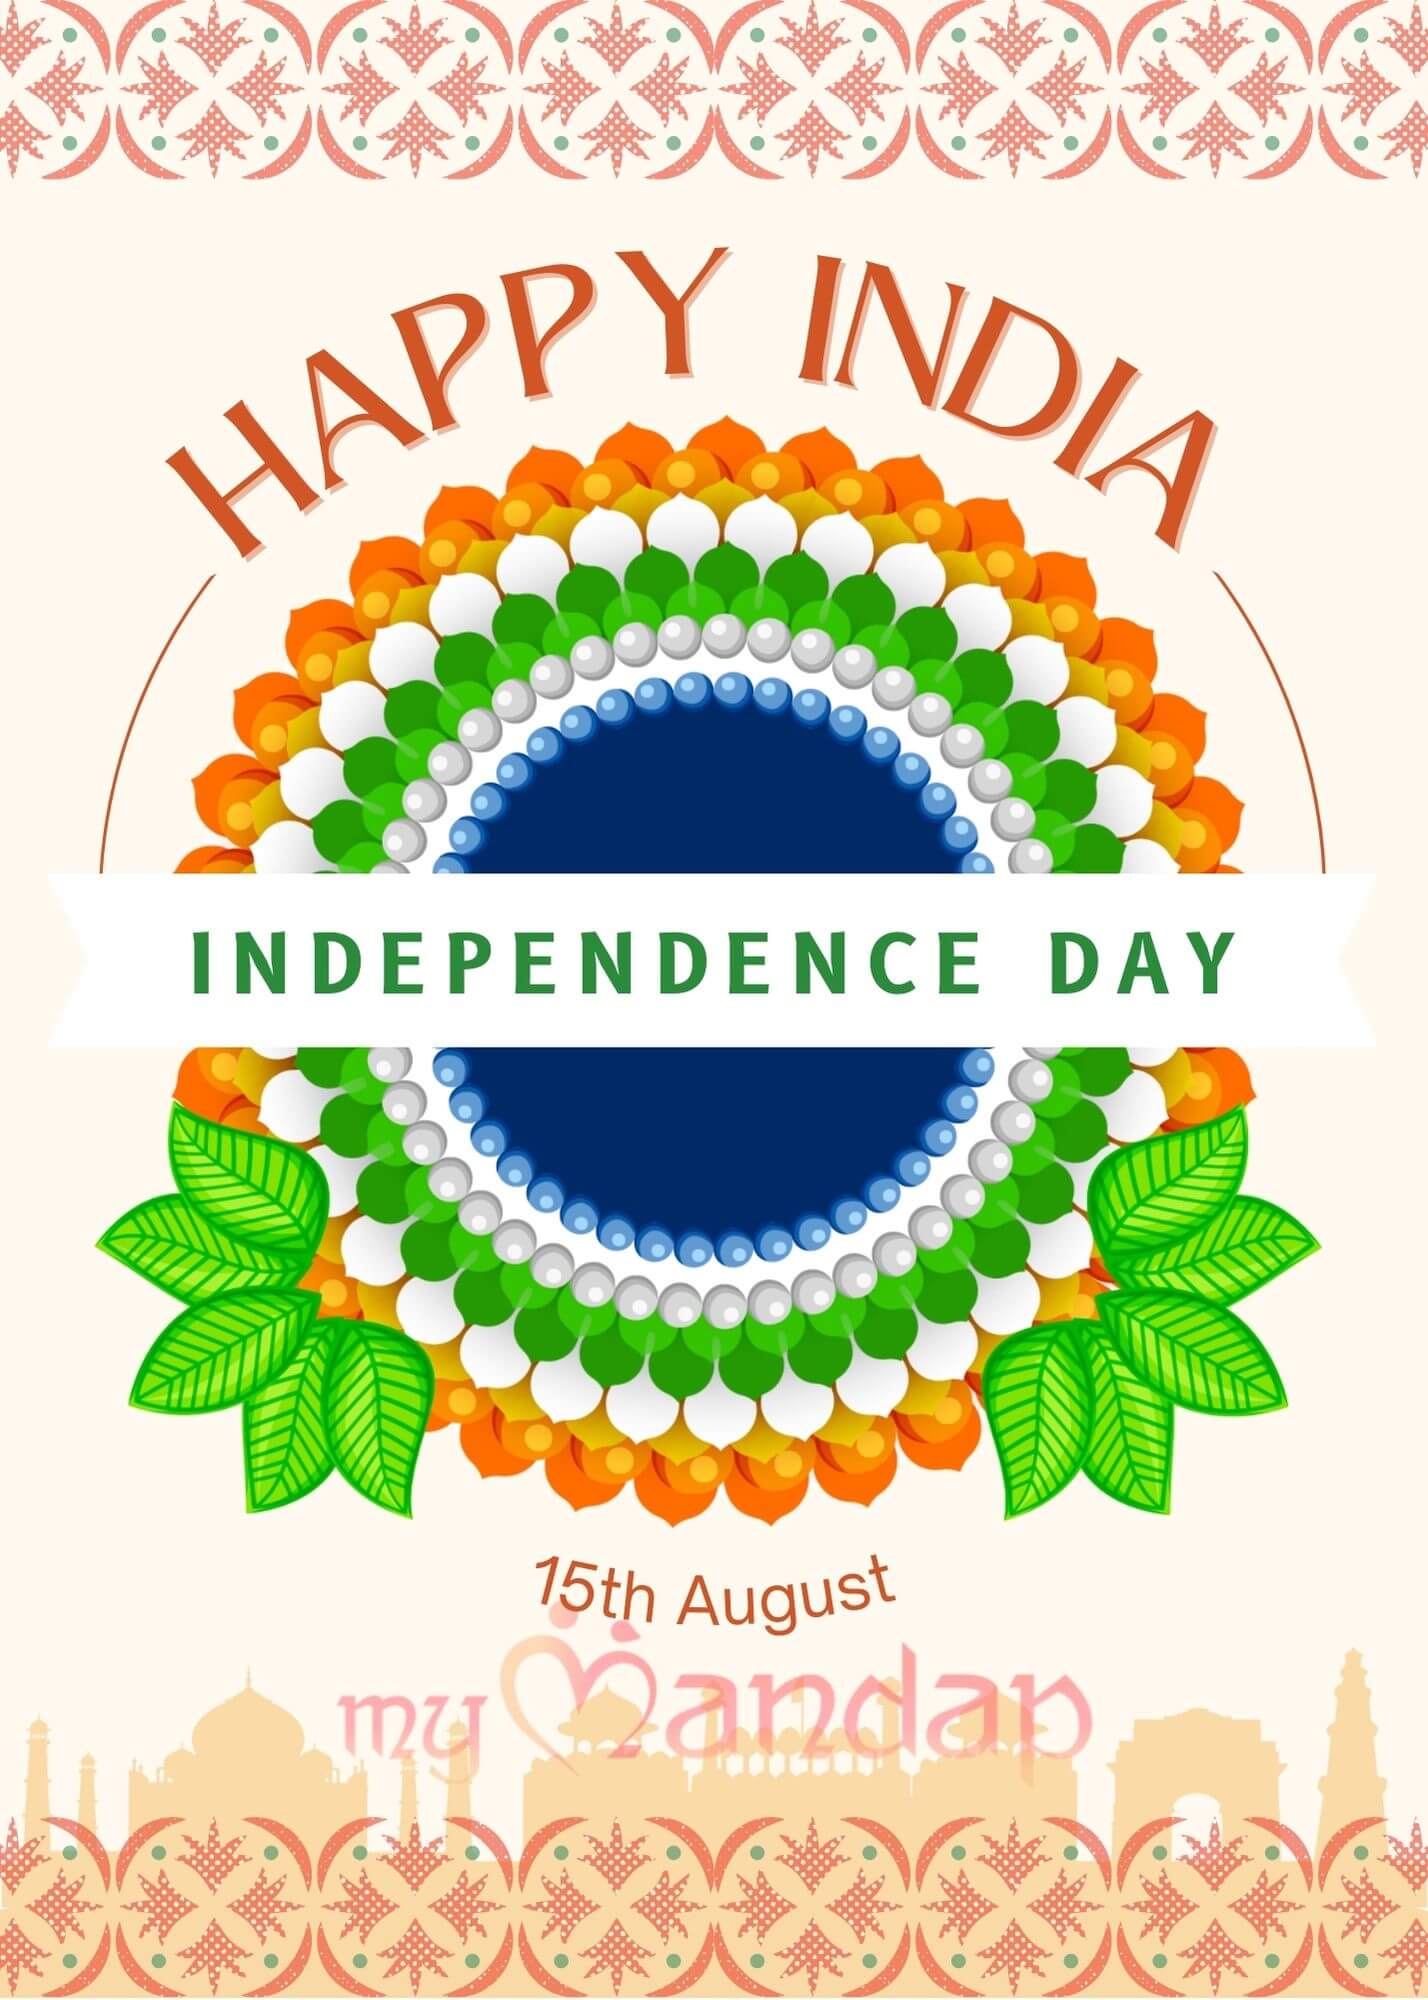 Happy India Independence Day Card - myMandap Cards